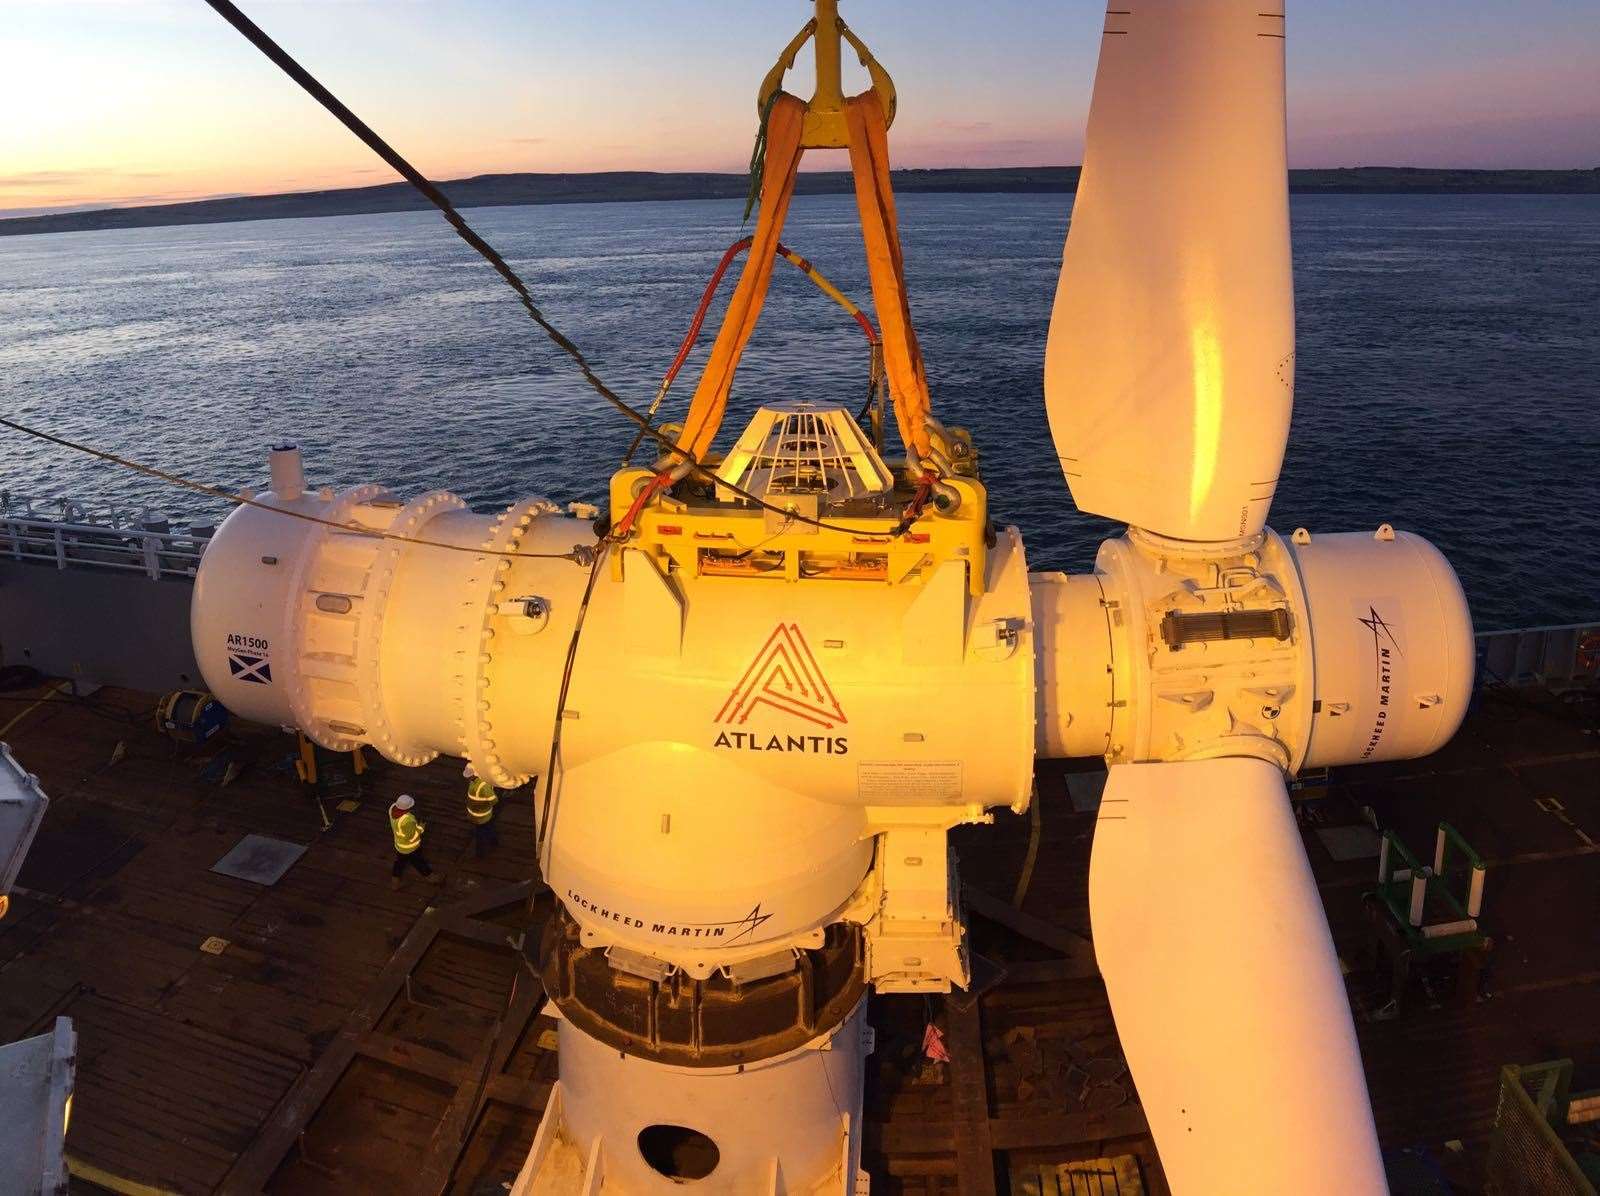 Phase 1A of the MeyGen project delivered 'the longest ever period of uninterrupted generation from a multi-megawatt tidal turbine installation'.